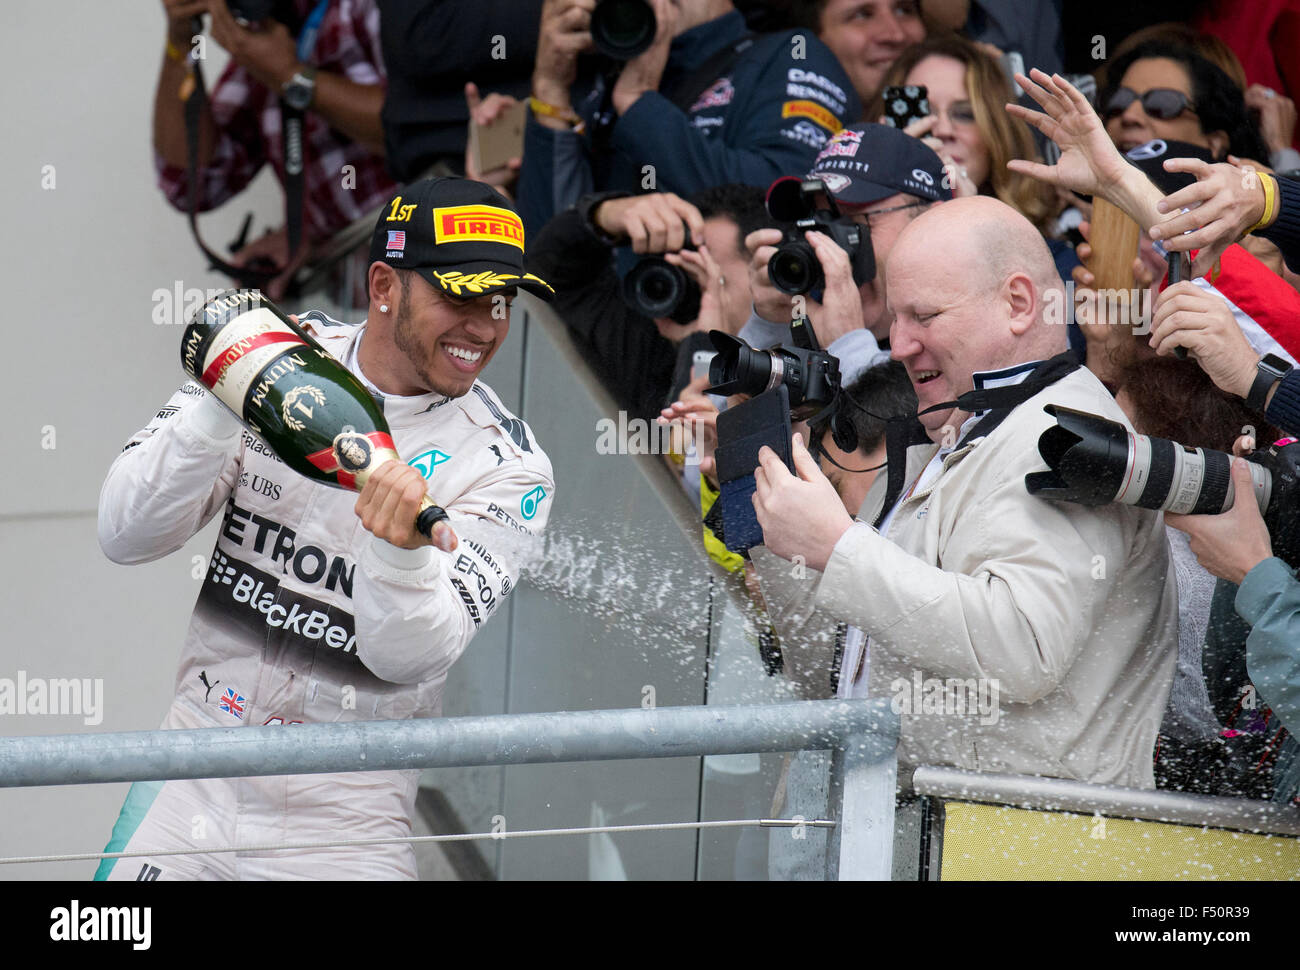 Austin, TX USA October 25, 2015: Formula 1 driver Lewis Hamilton celebrates his victory by spraying champagne over spectators after the United States Grand Prix that clinched his world championship title. Stock Photo